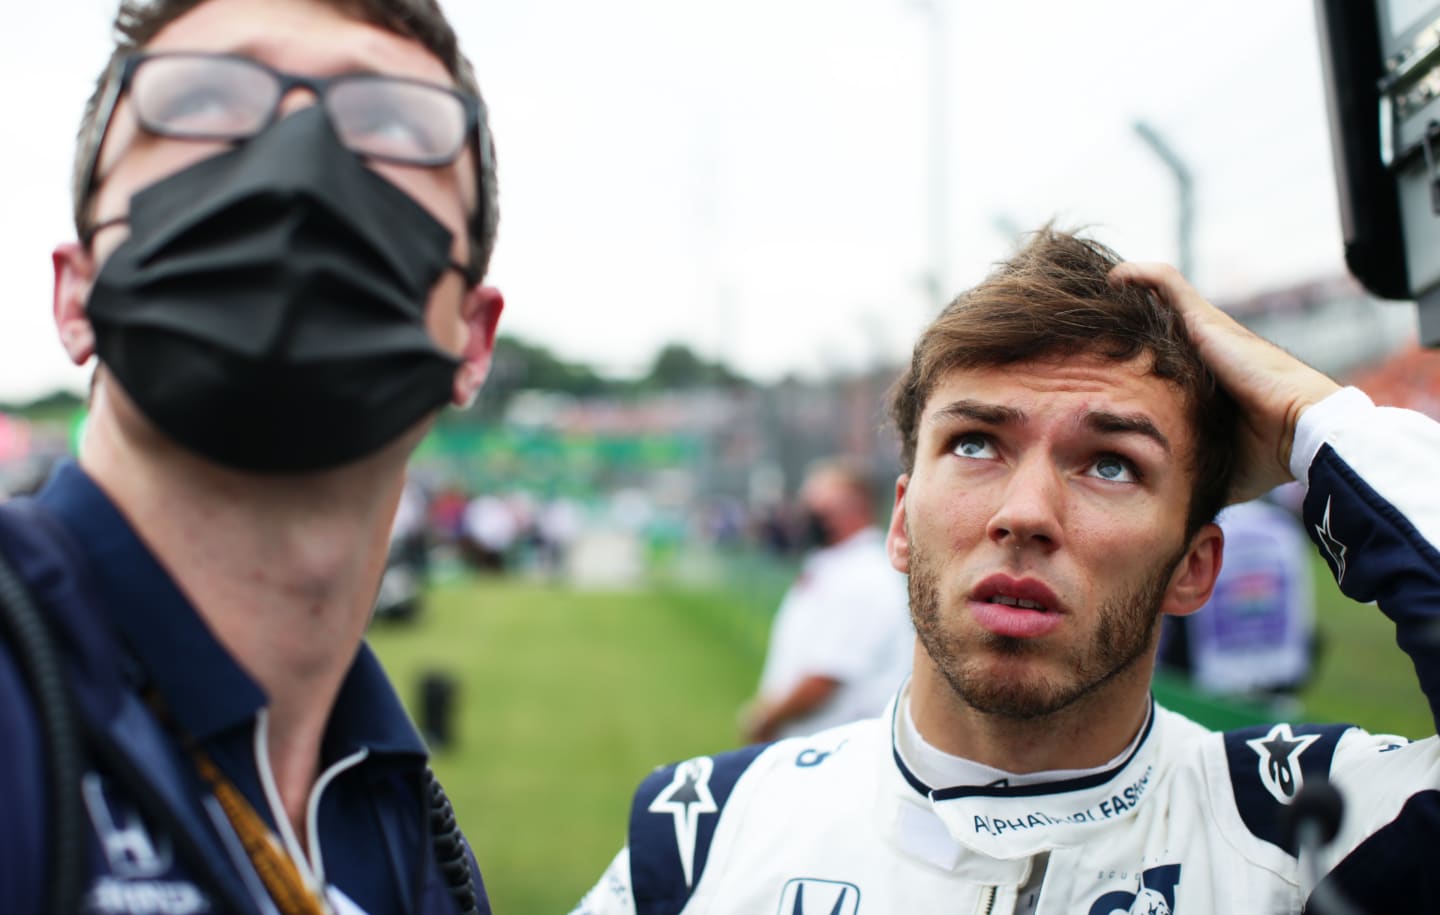 BUDAPEST, HUNGARY - AUGUST 01: Pierre Gasly of France and Scuderia AlphaTauri prepares to drive on